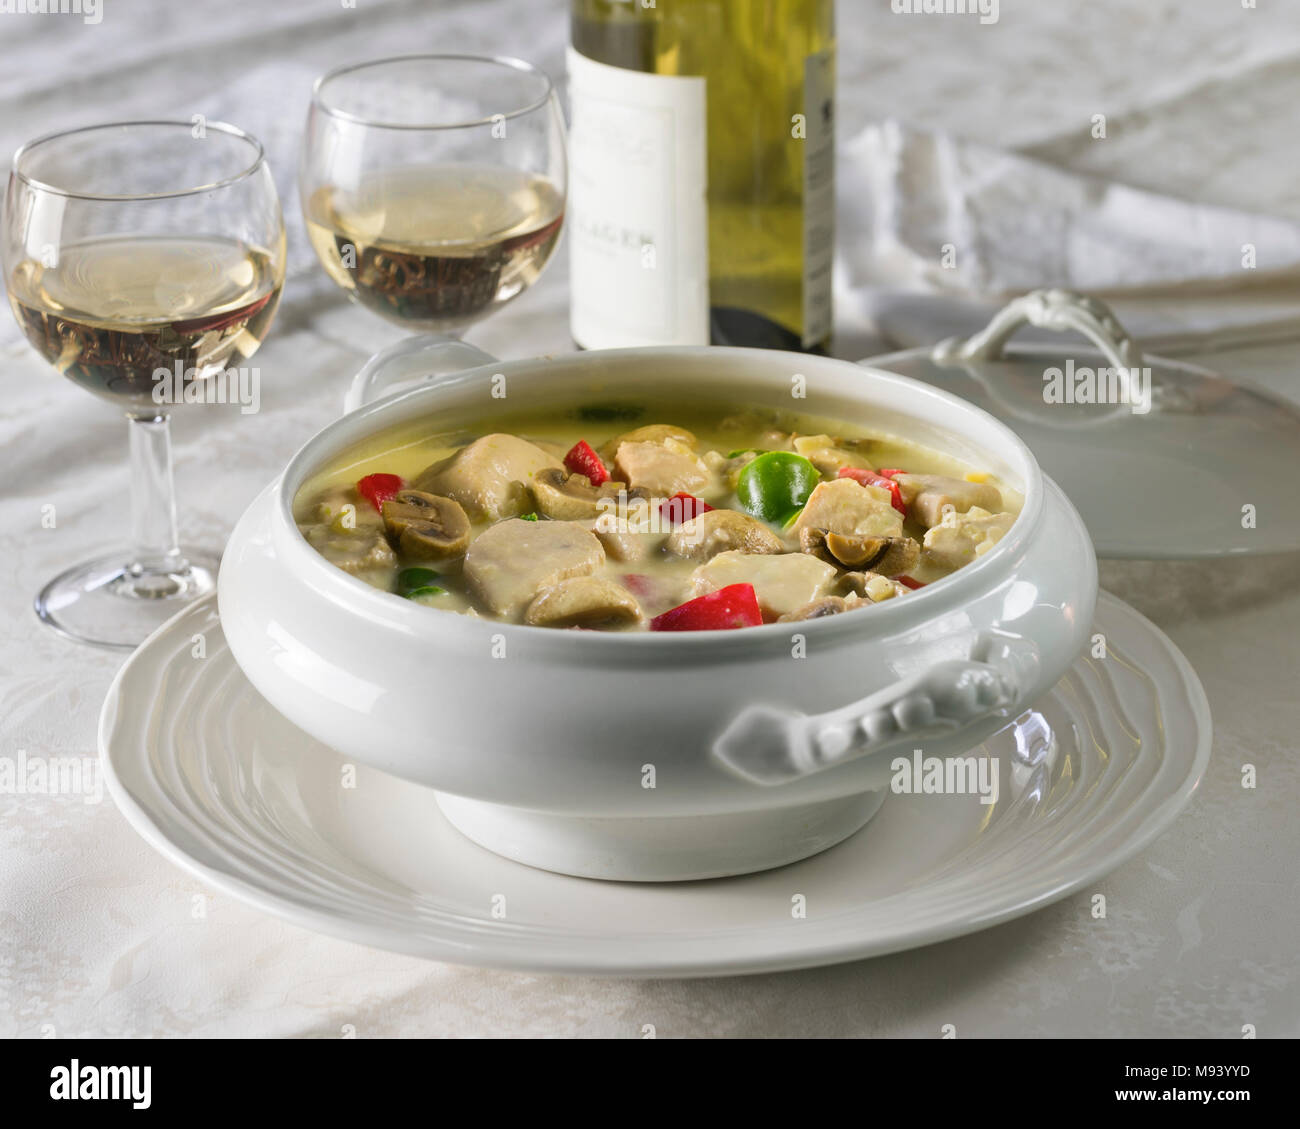 Chicken à la King. Chicken in cream sauce, with sherry, mushrooms and peppers. Stock Photo